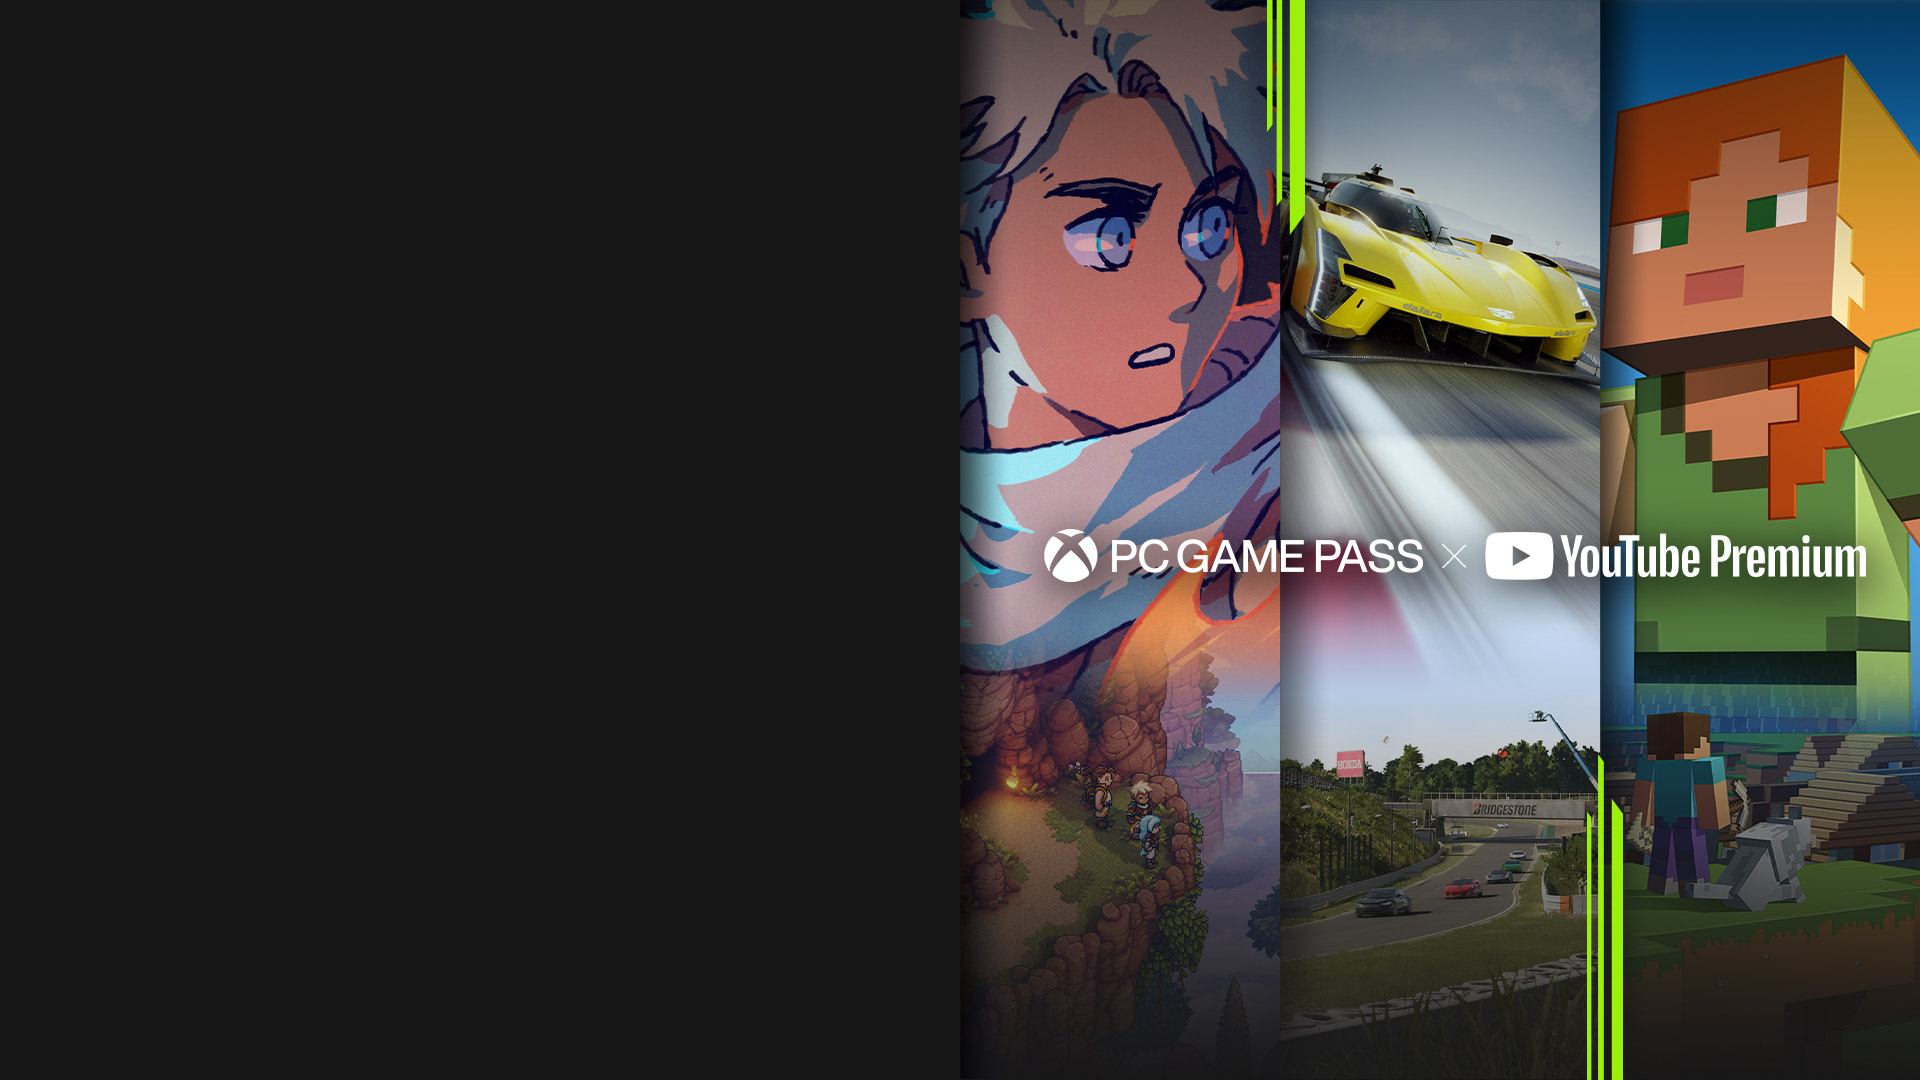 PC Game Pass logo and YouTube Premium logo, on top of multiple games available with PC Game Pass, including Halo Infinite, Sea of Stars, PAYDAY 3, Forza Motorsport, and Minecraft.